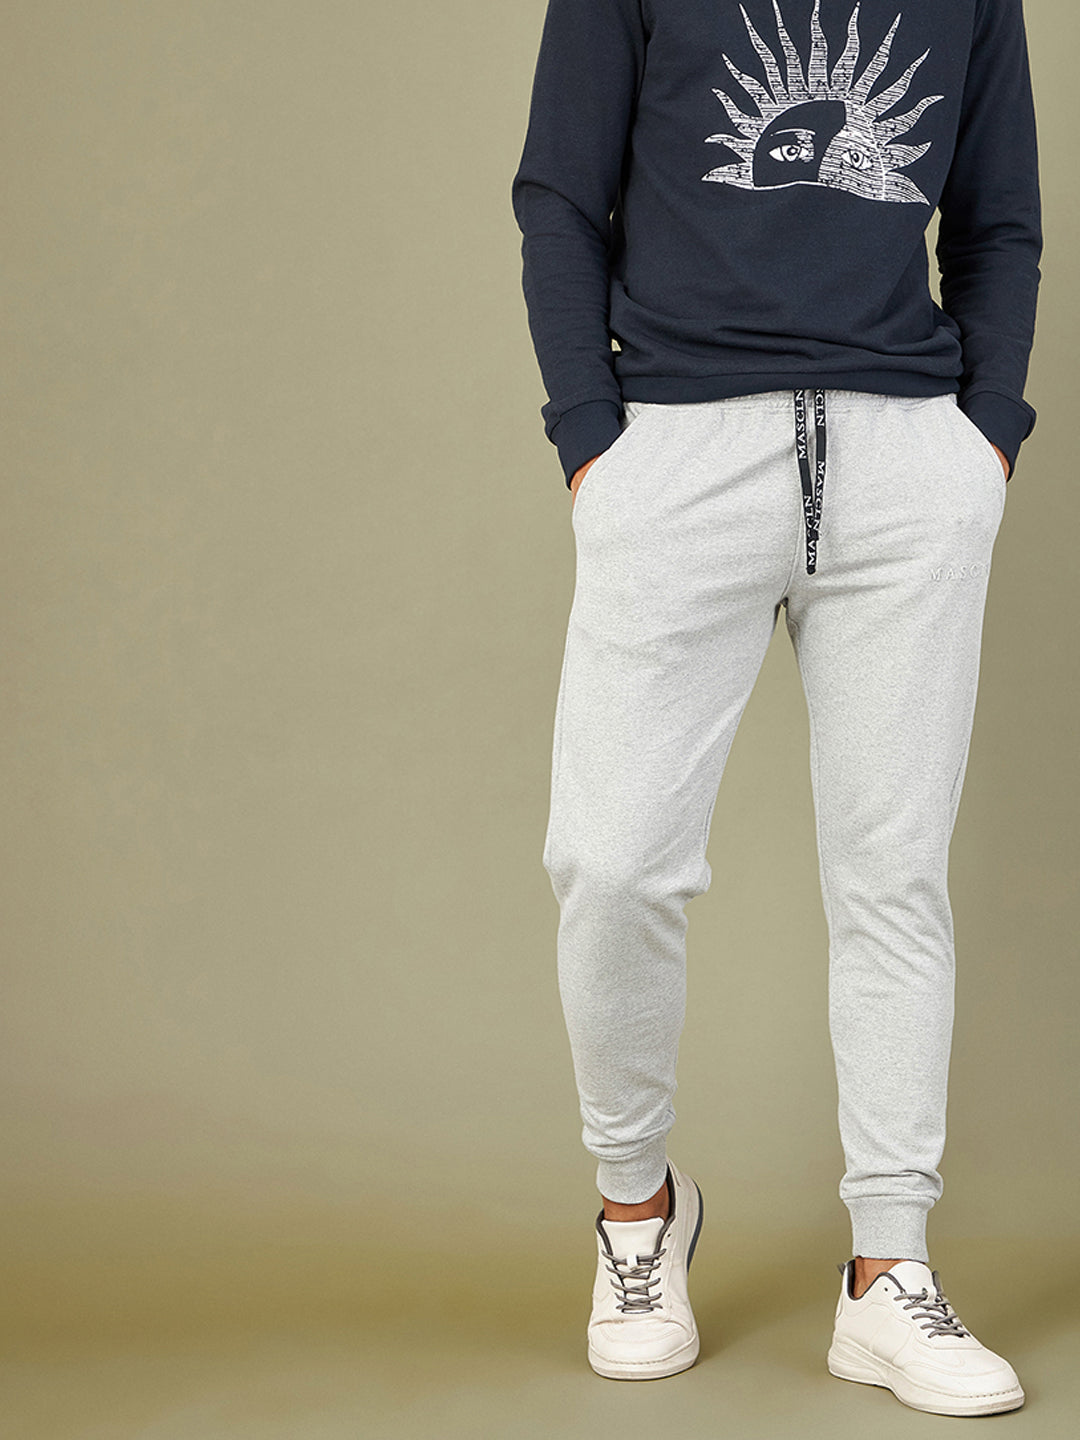 Shop Hollister Joggers for Men up to 40% Off